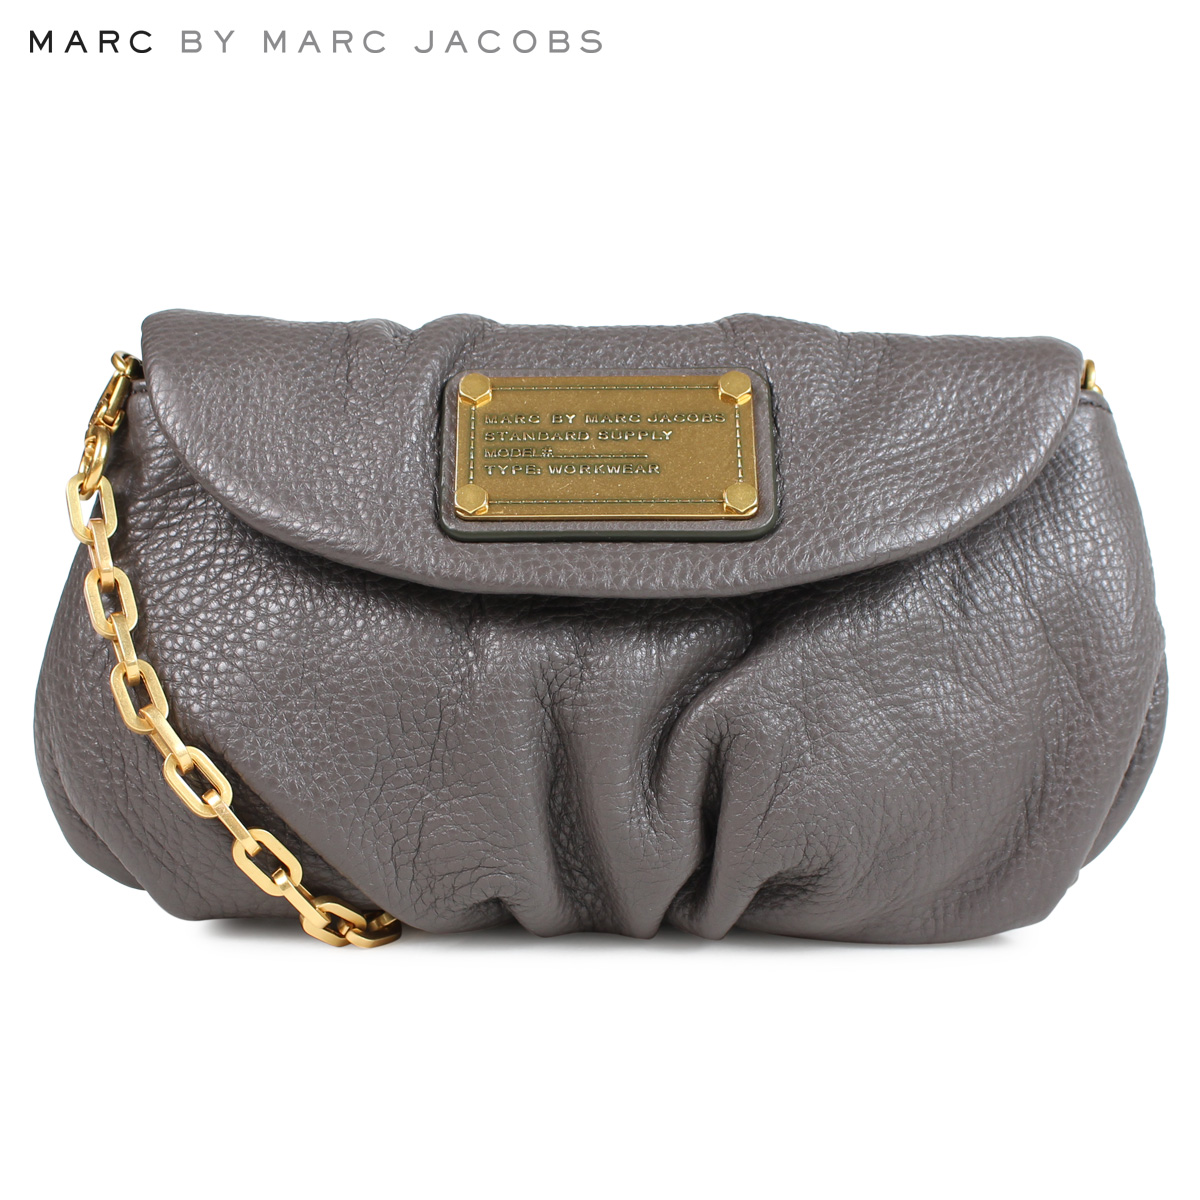 Whats up Sports: MARC BY MARC JACOBS CLASSIC Q KARLIE CROSSBODY mark by mark Jacobs bag shoulder ...